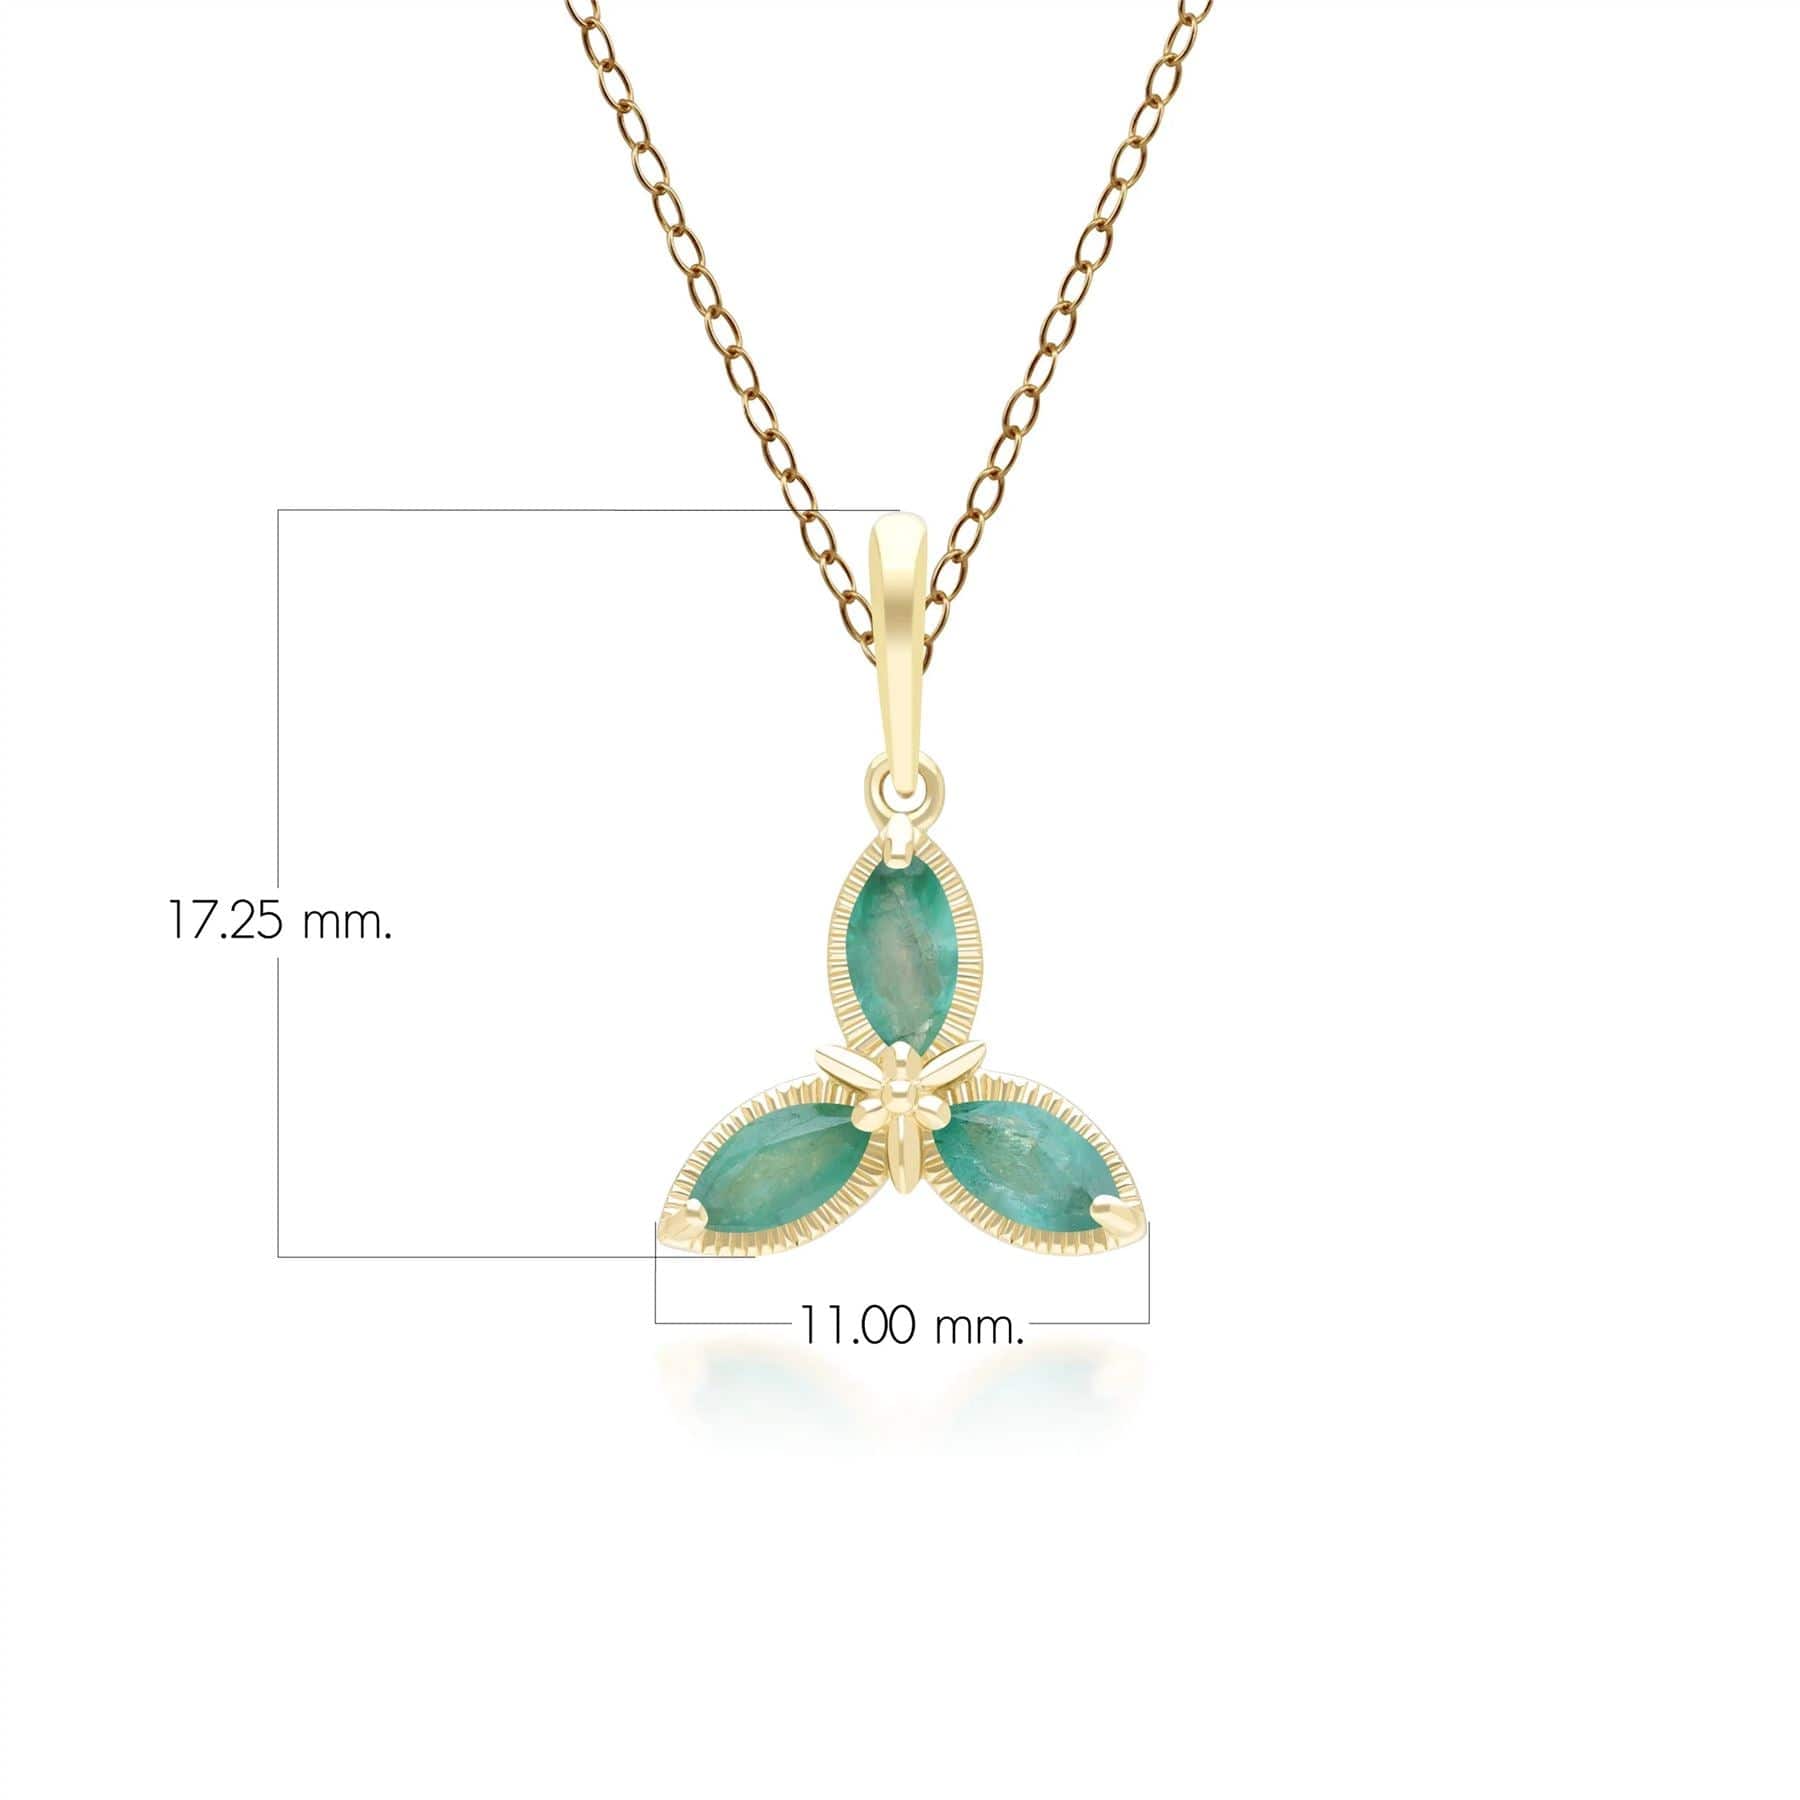 Floral Marquise Emerald Pendant Necklace in 9ct Yellow Gold